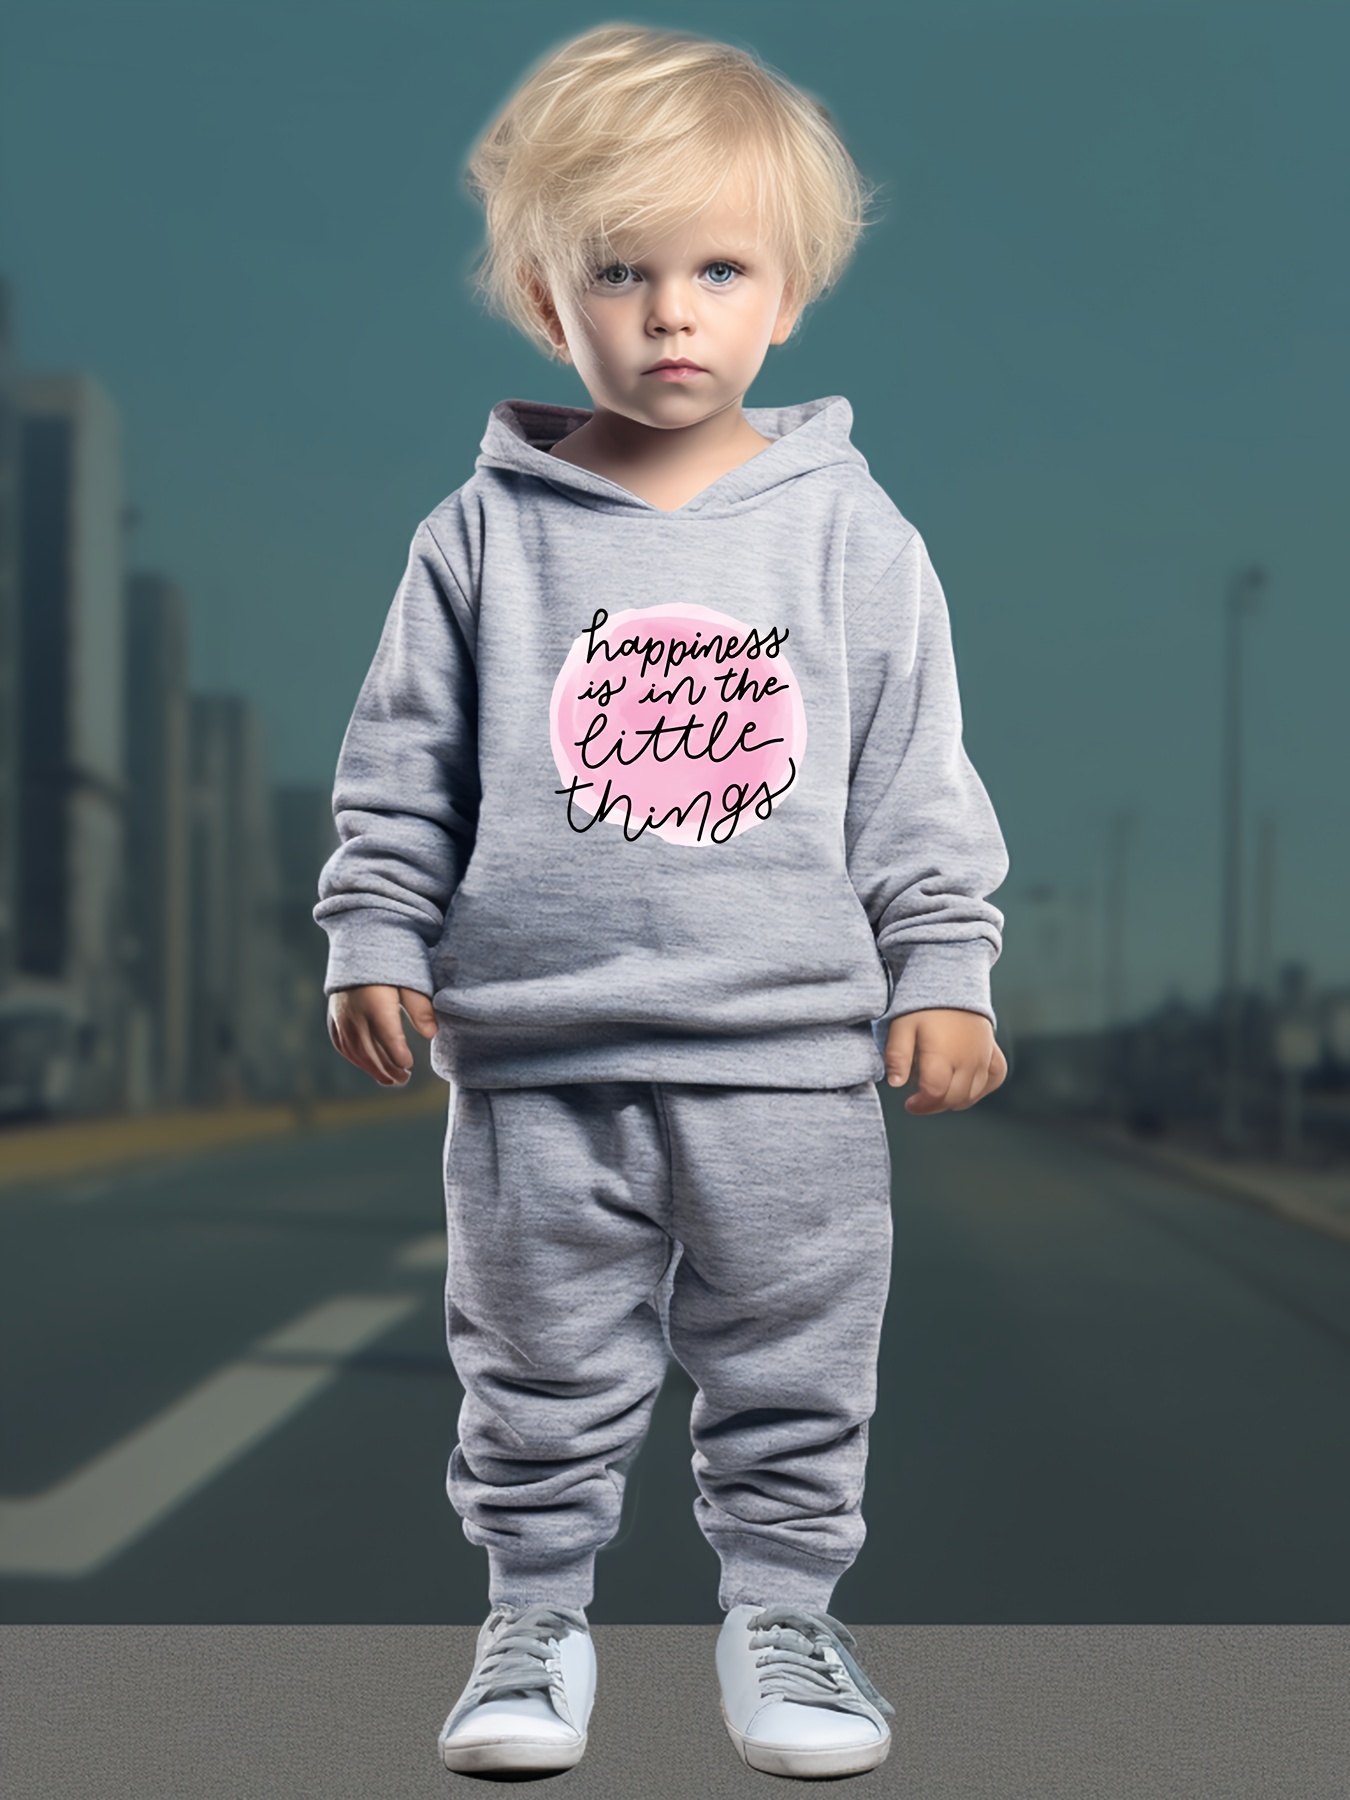 It'S The Little Things - Sweatshirt para Mulher